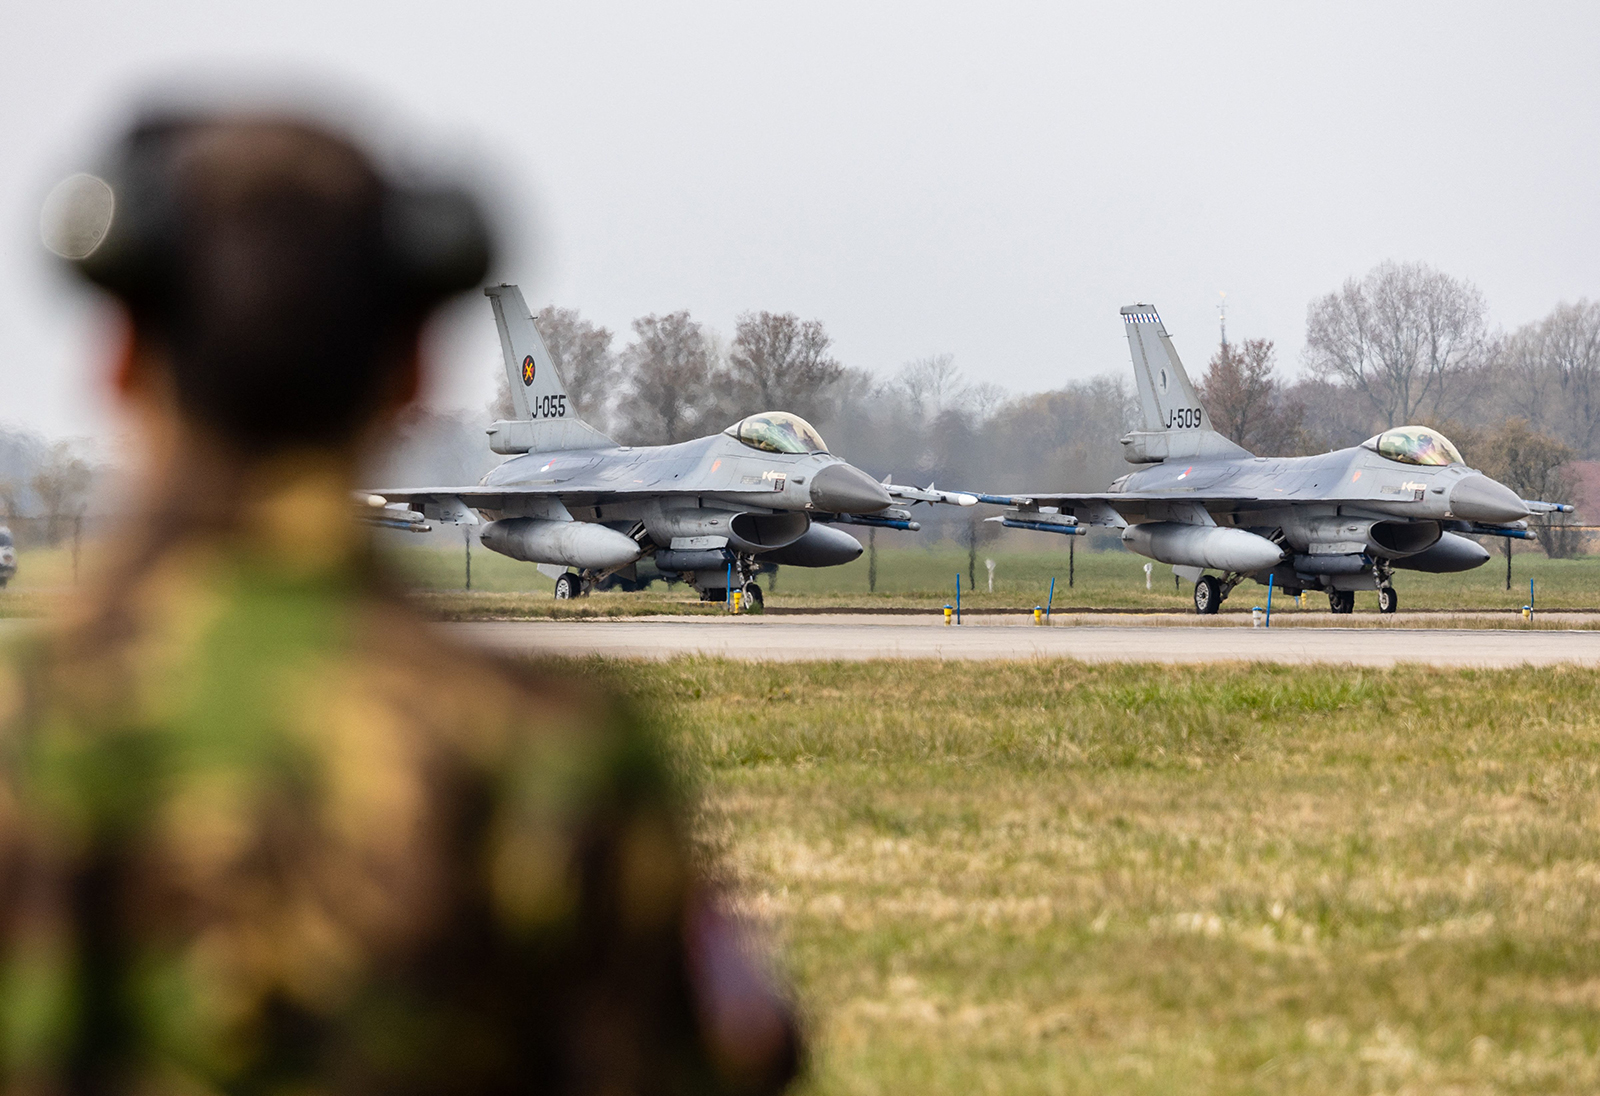 F-16 fighter jets during the NATO international air force exercise Frisian Flag, at Leeuwarden Air Base, Netherlands, on March 28, 2022.